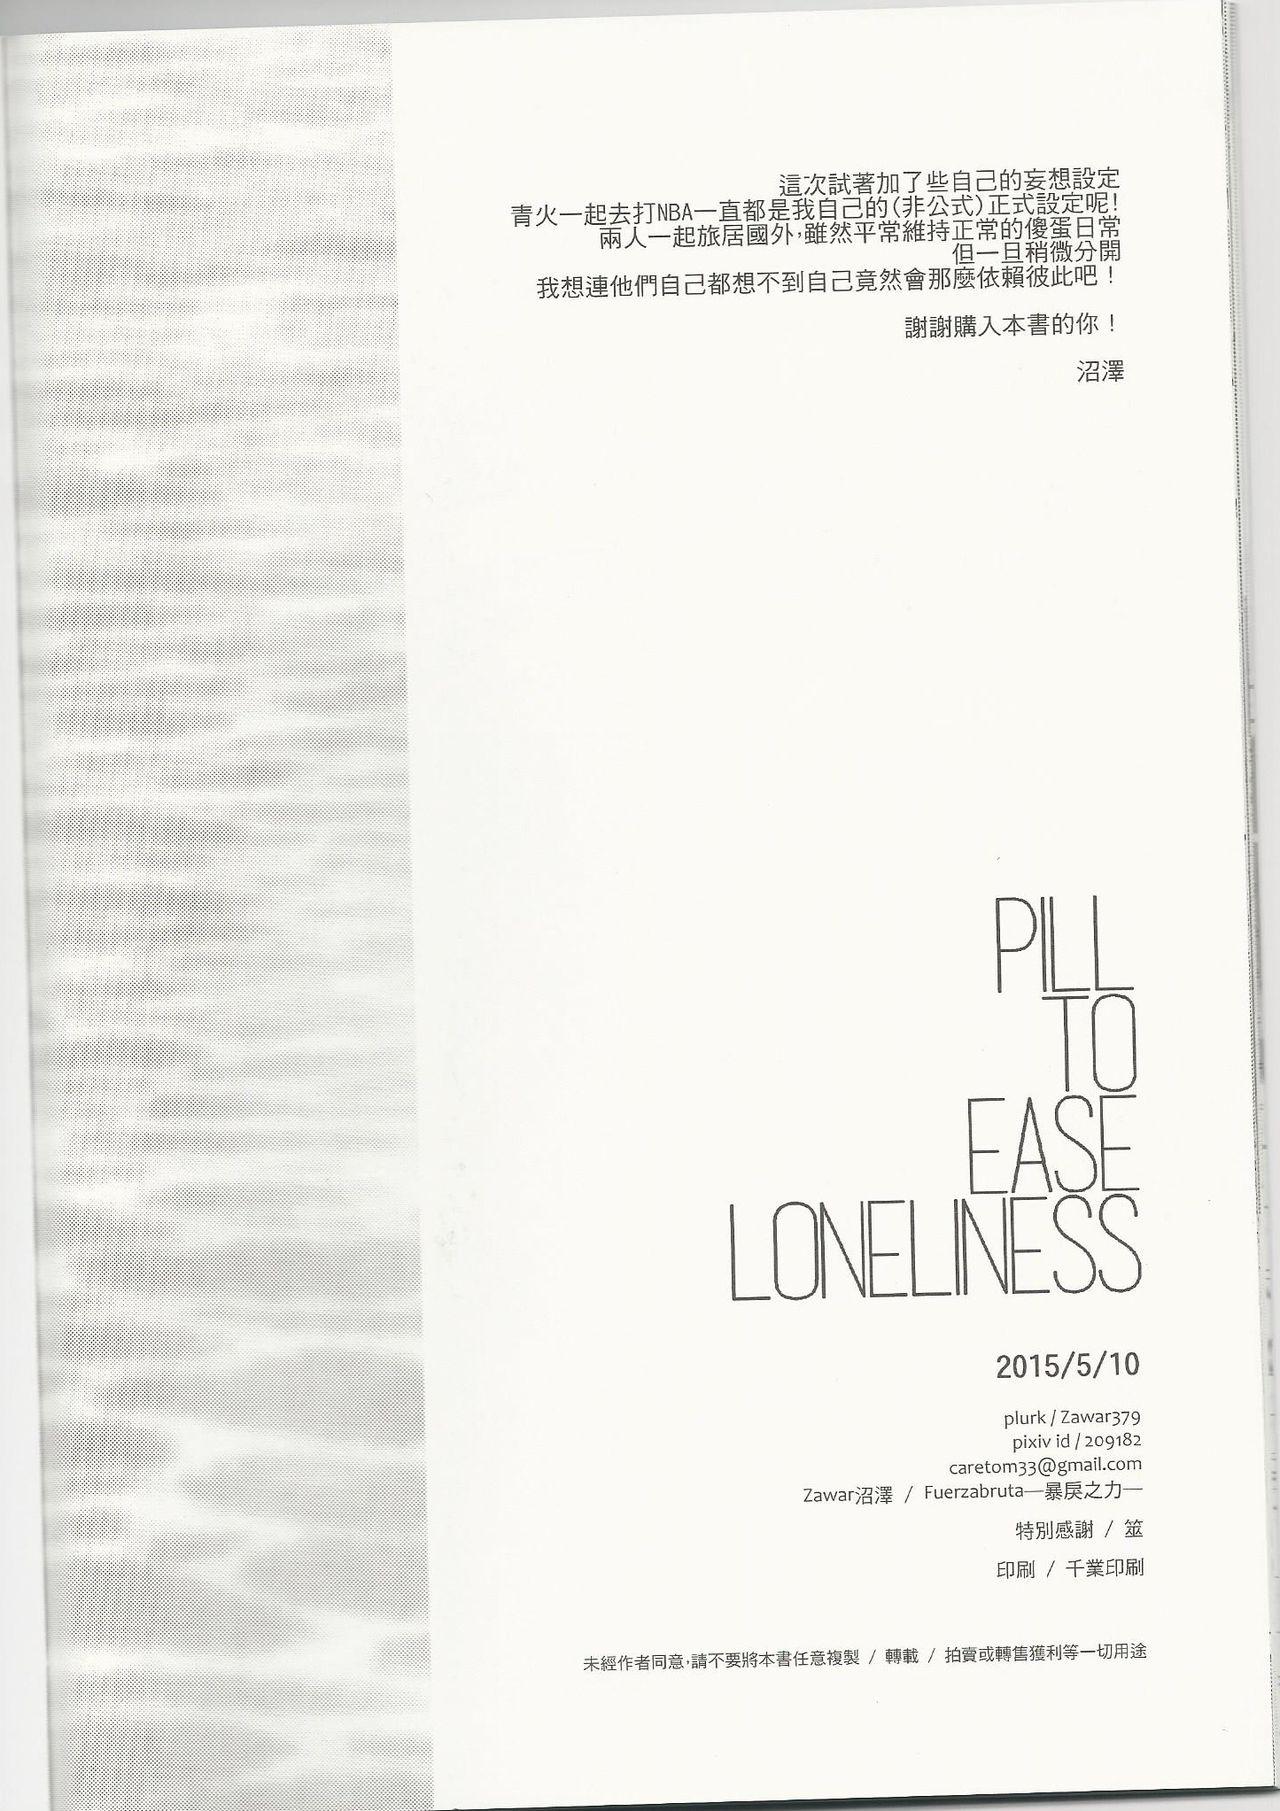 PILL TO EASE LONLINESS 24